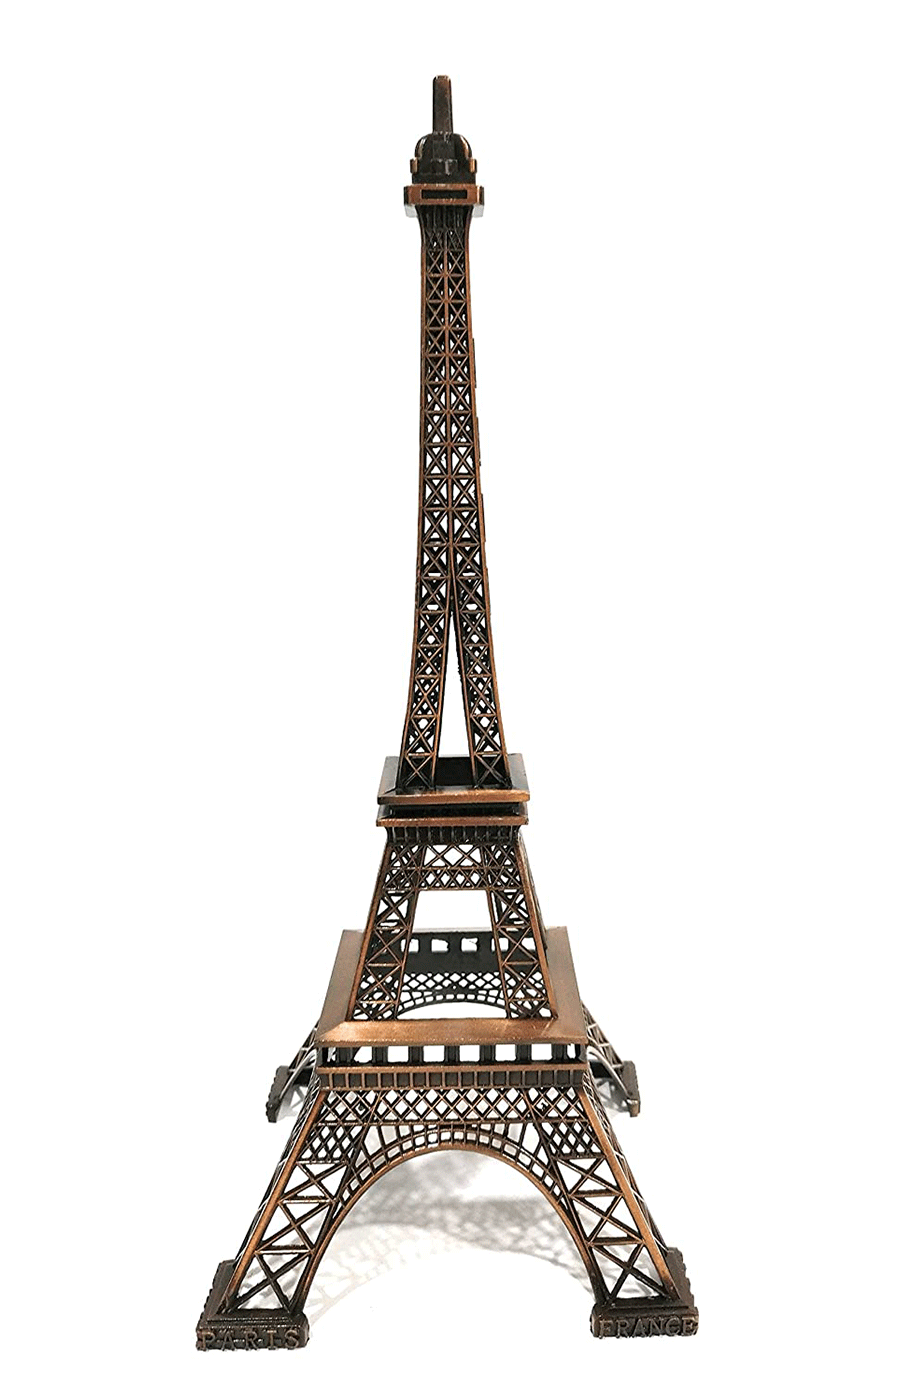 FunkyTradition 33 CM Tall Eiffel Tower Statue Metal Showpiece in Copper Metal | Birthday Anniversary Gift and Home Office Decor 13" Tall